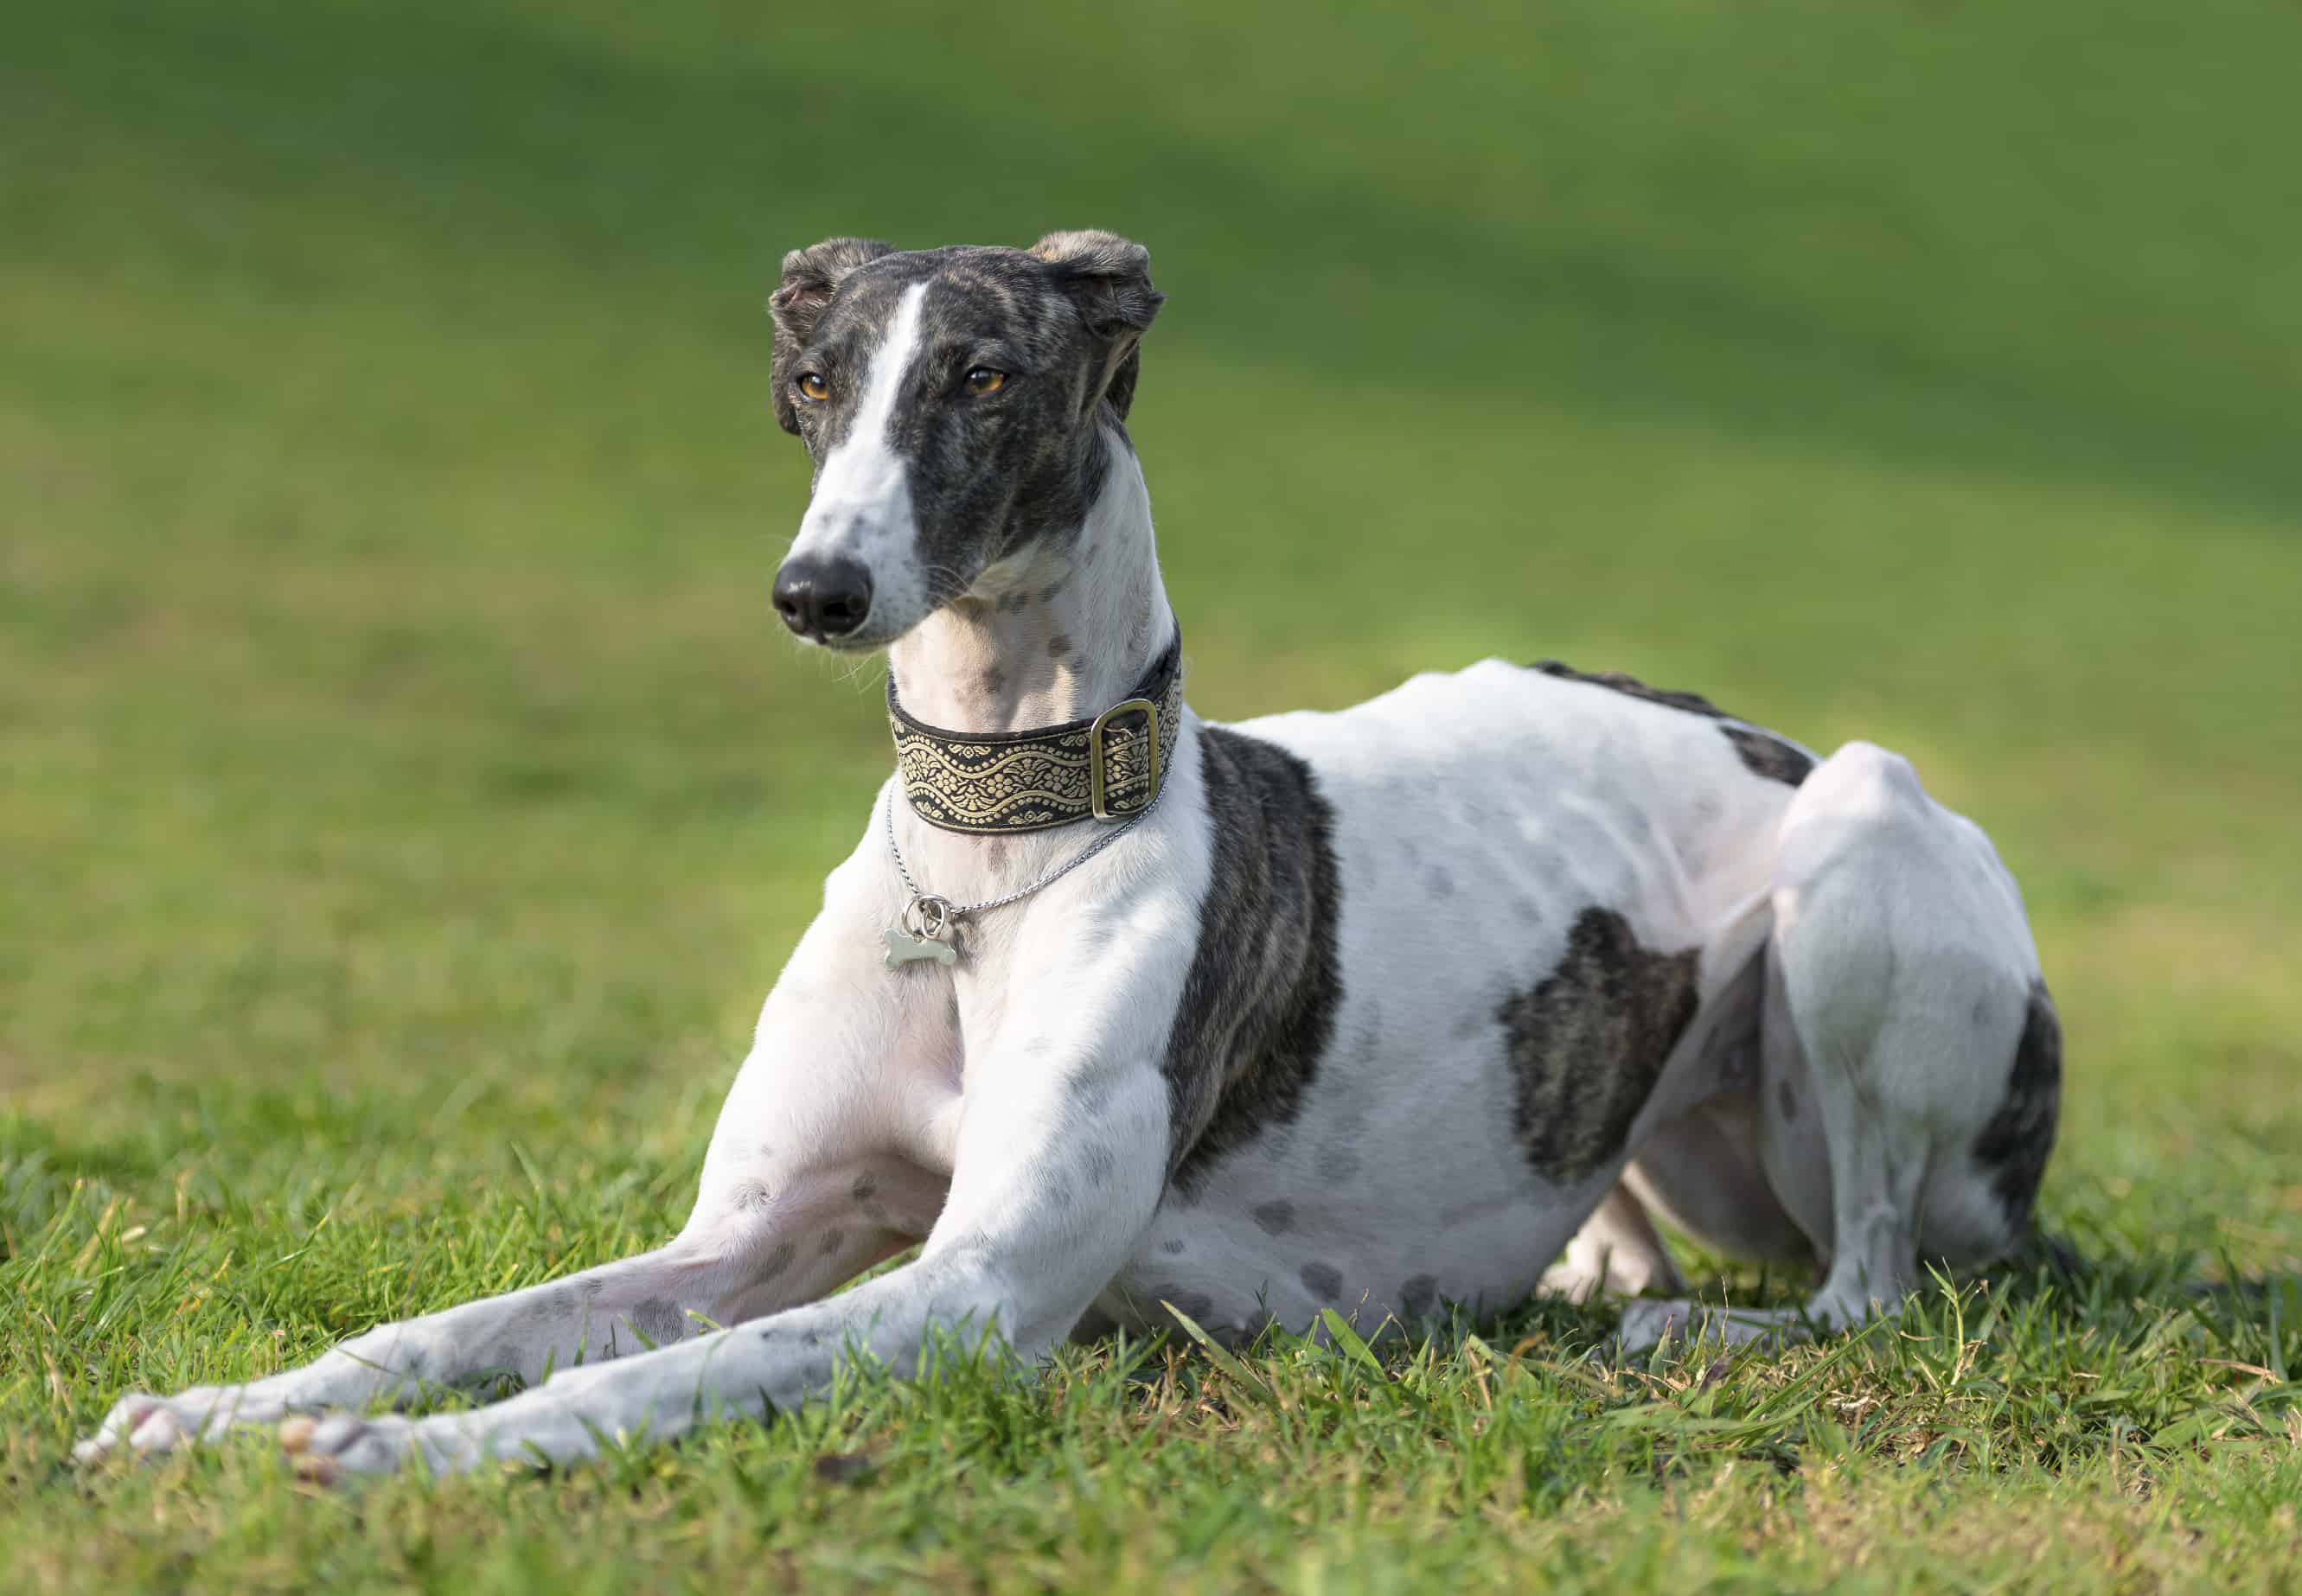 Learn about the history, personality, and needs of the Greyhound breed